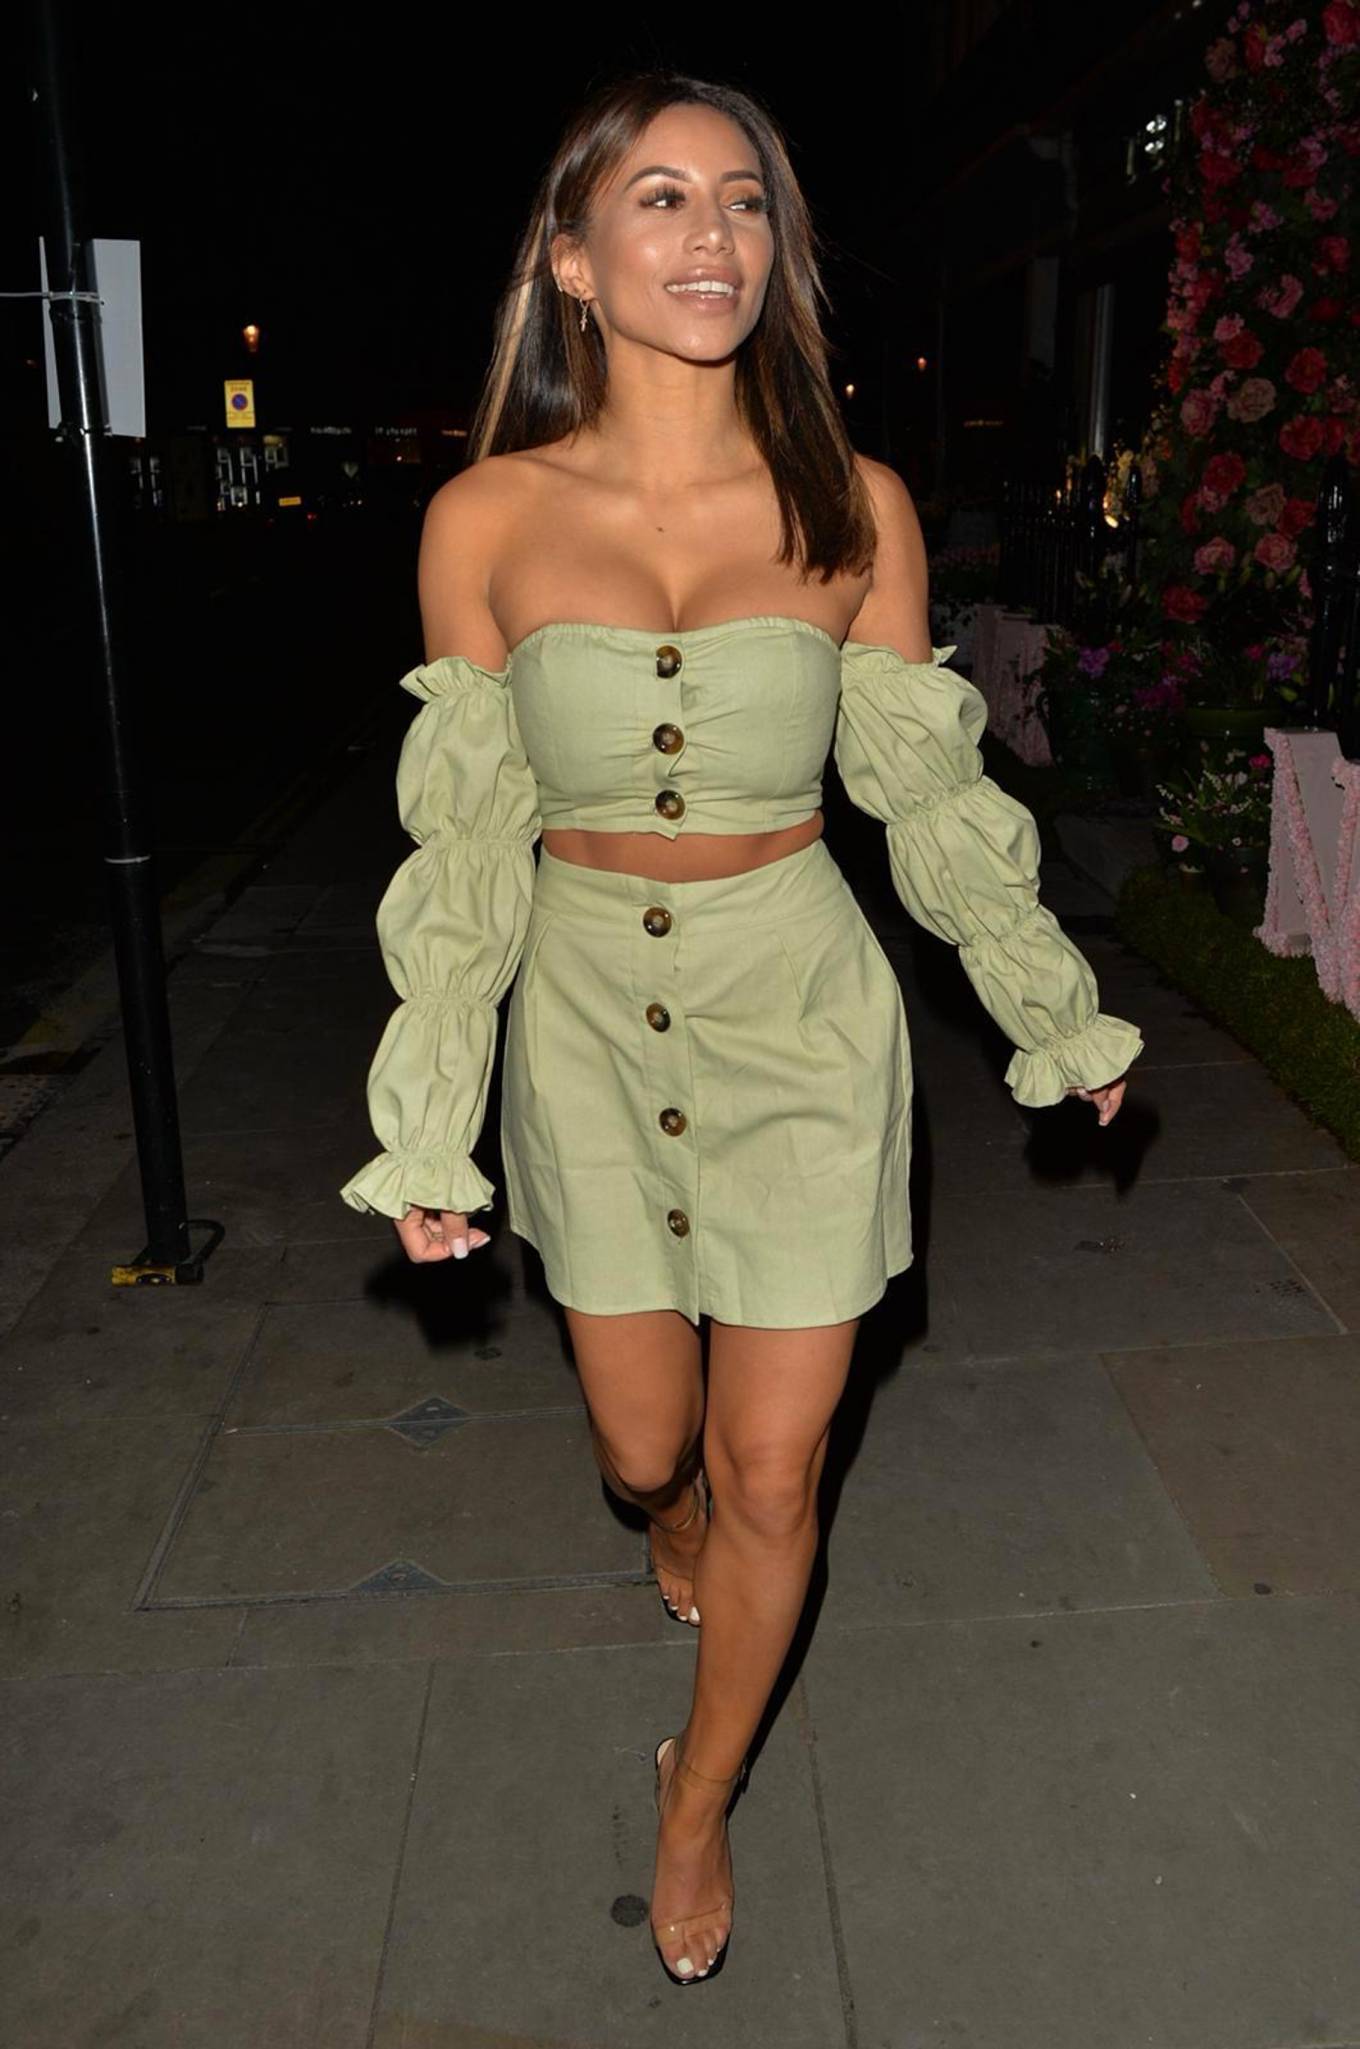 Kayleigh Morris 2020 : Kayleigh Morris – Looking chic while night out in London-03